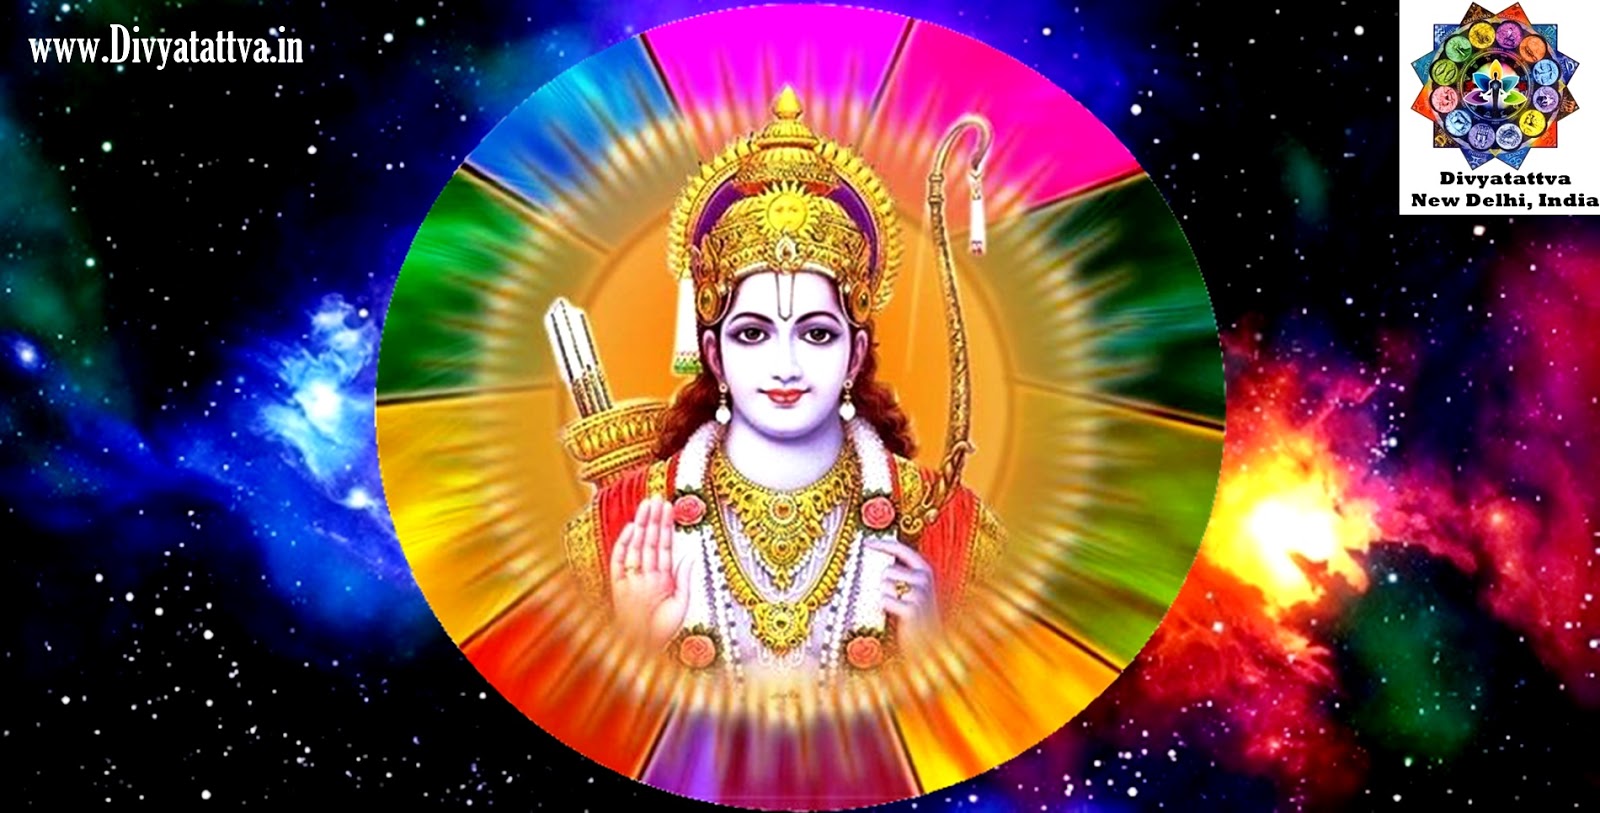 lord rama hd wallpapers for mobile,illustration,psychedelic art,graphic design,graphics,fictional character